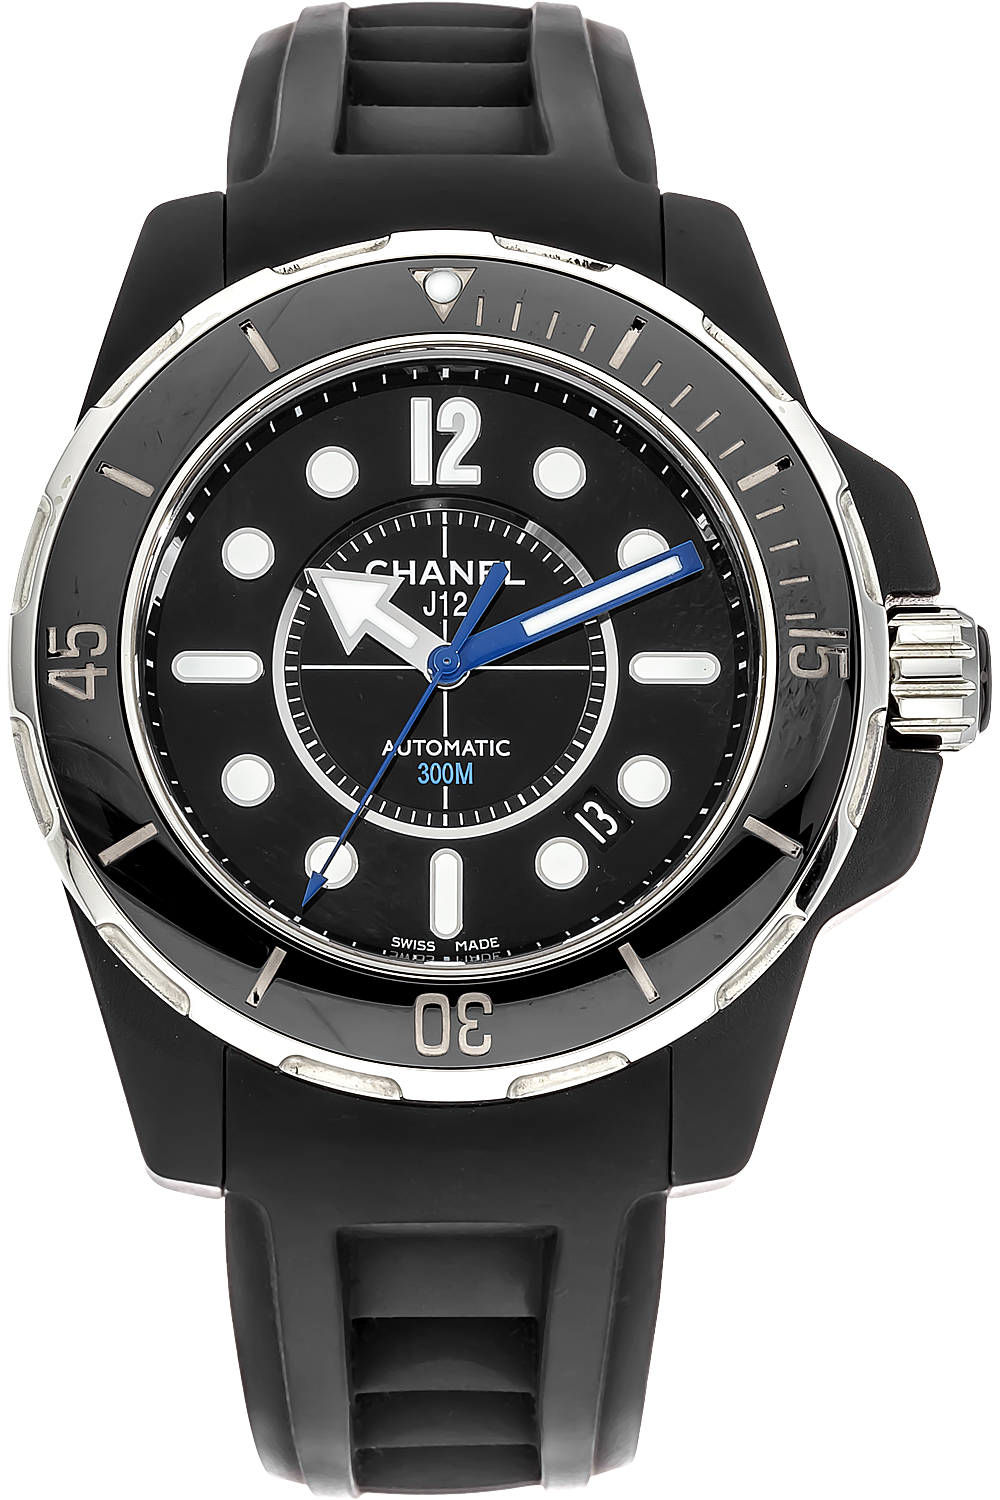 Pre-Owned Chanel J12 Marine Automatic (H2558)